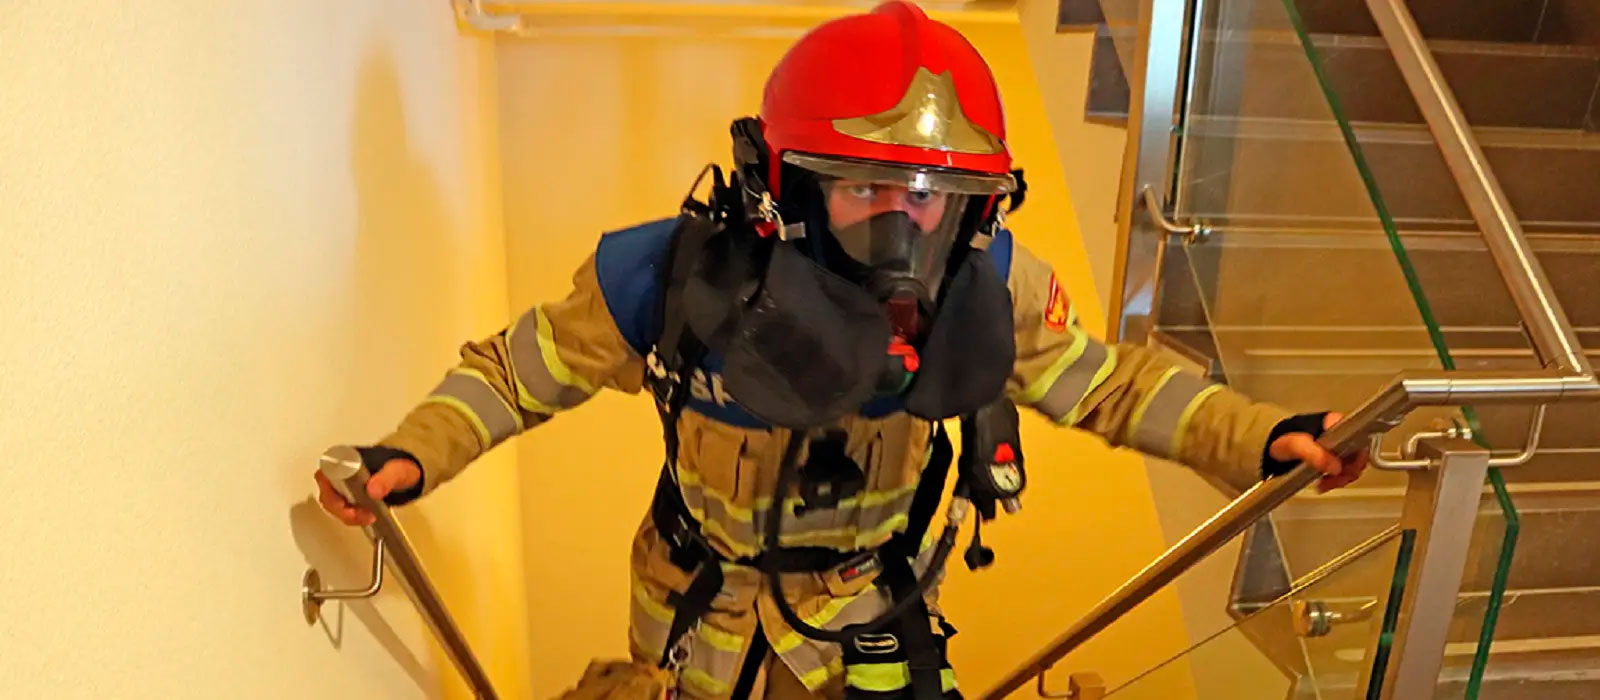 Firefighter stairclimb